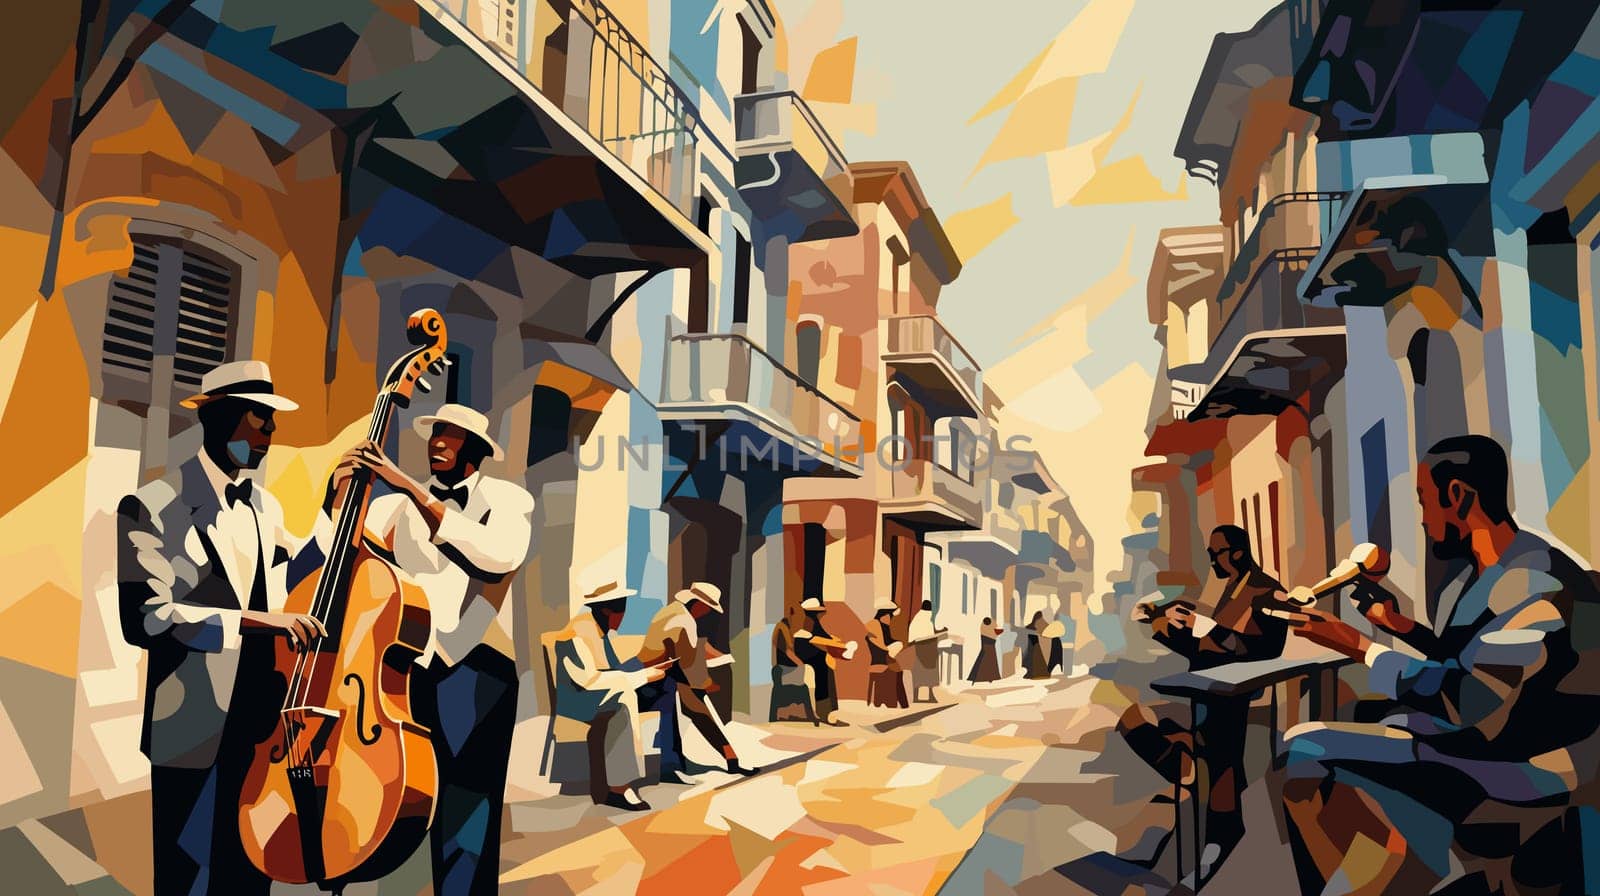 Abstract image of jazz musicians on the streets of New Orleans by palinchak